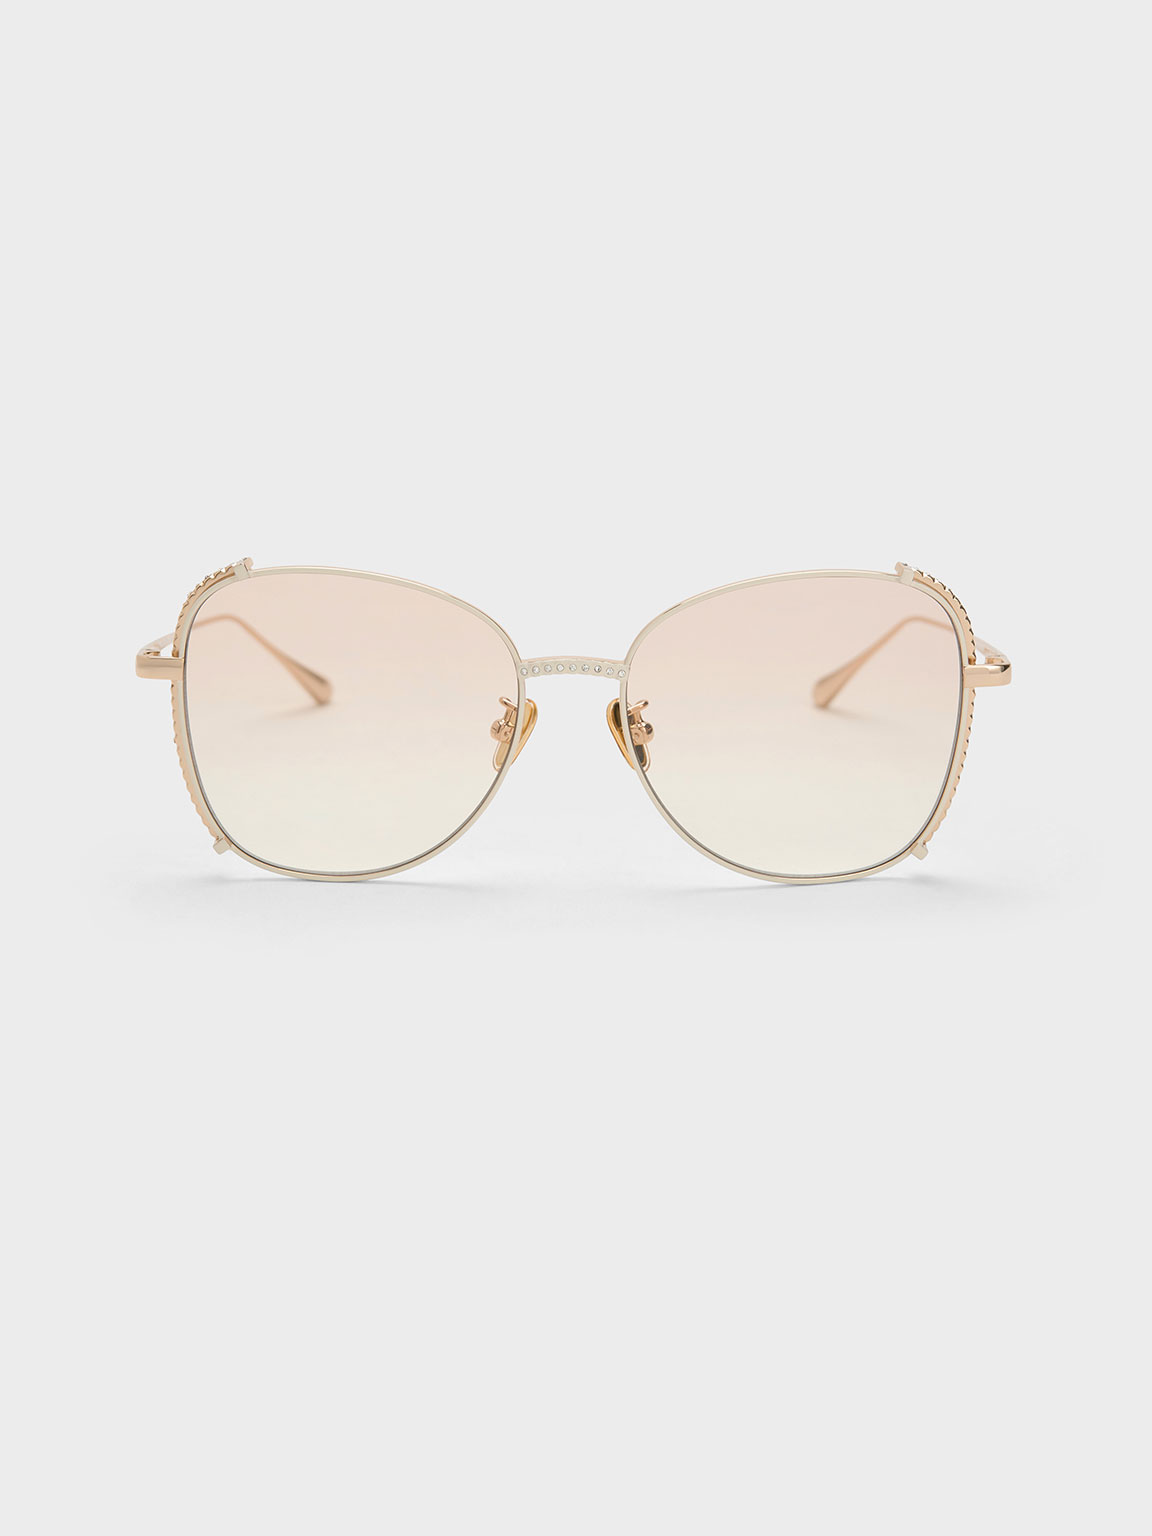 Shop CHANEL 2023 SS Oval Sunglasses by ROSEGOLD